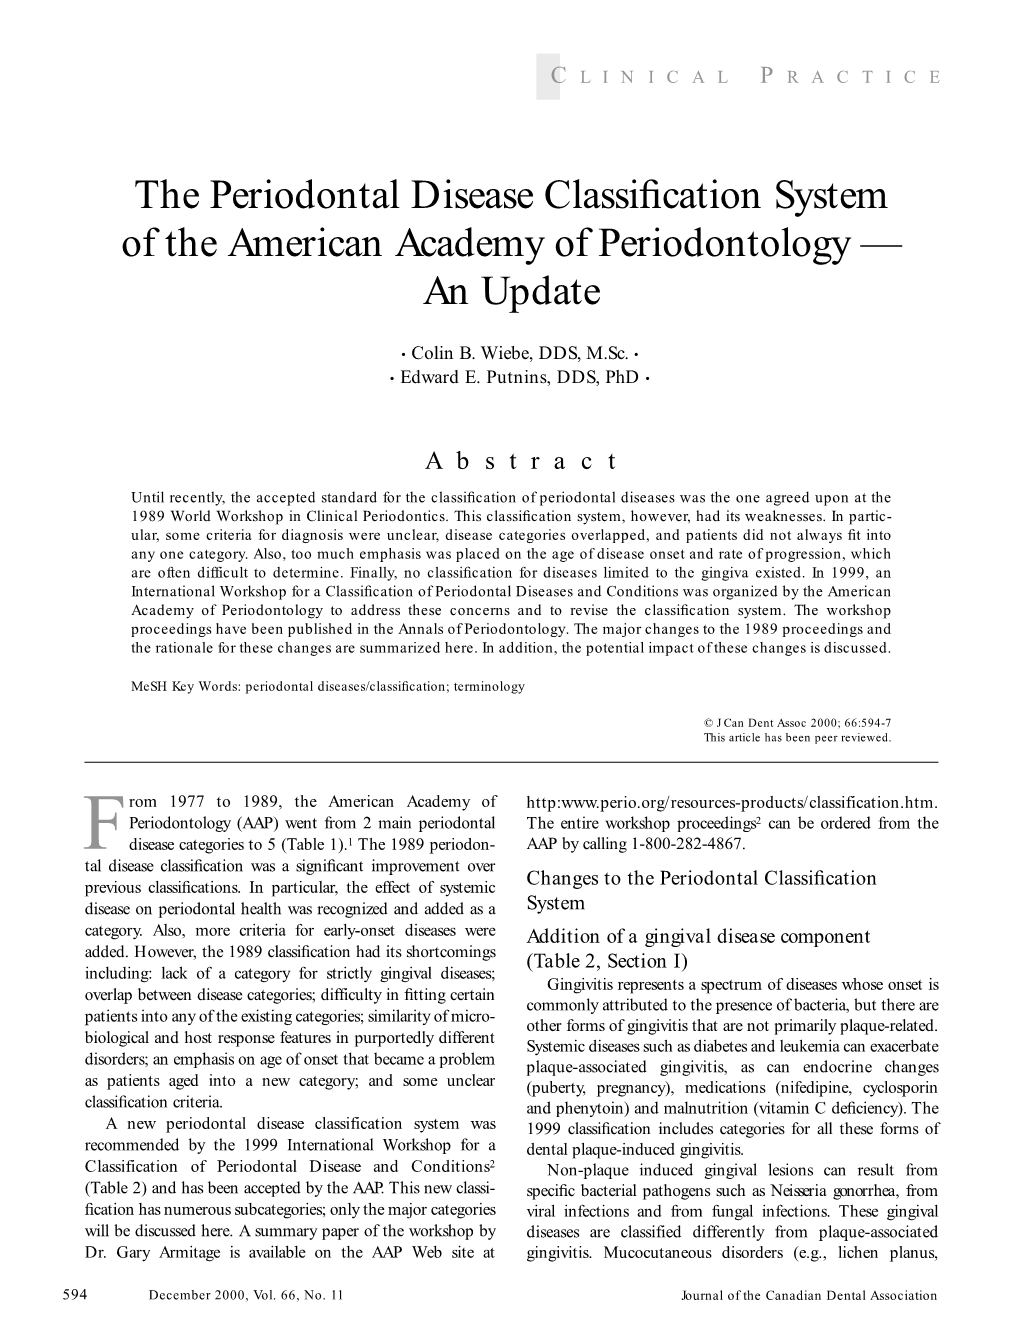 The Periodontal Disease Classification System of The